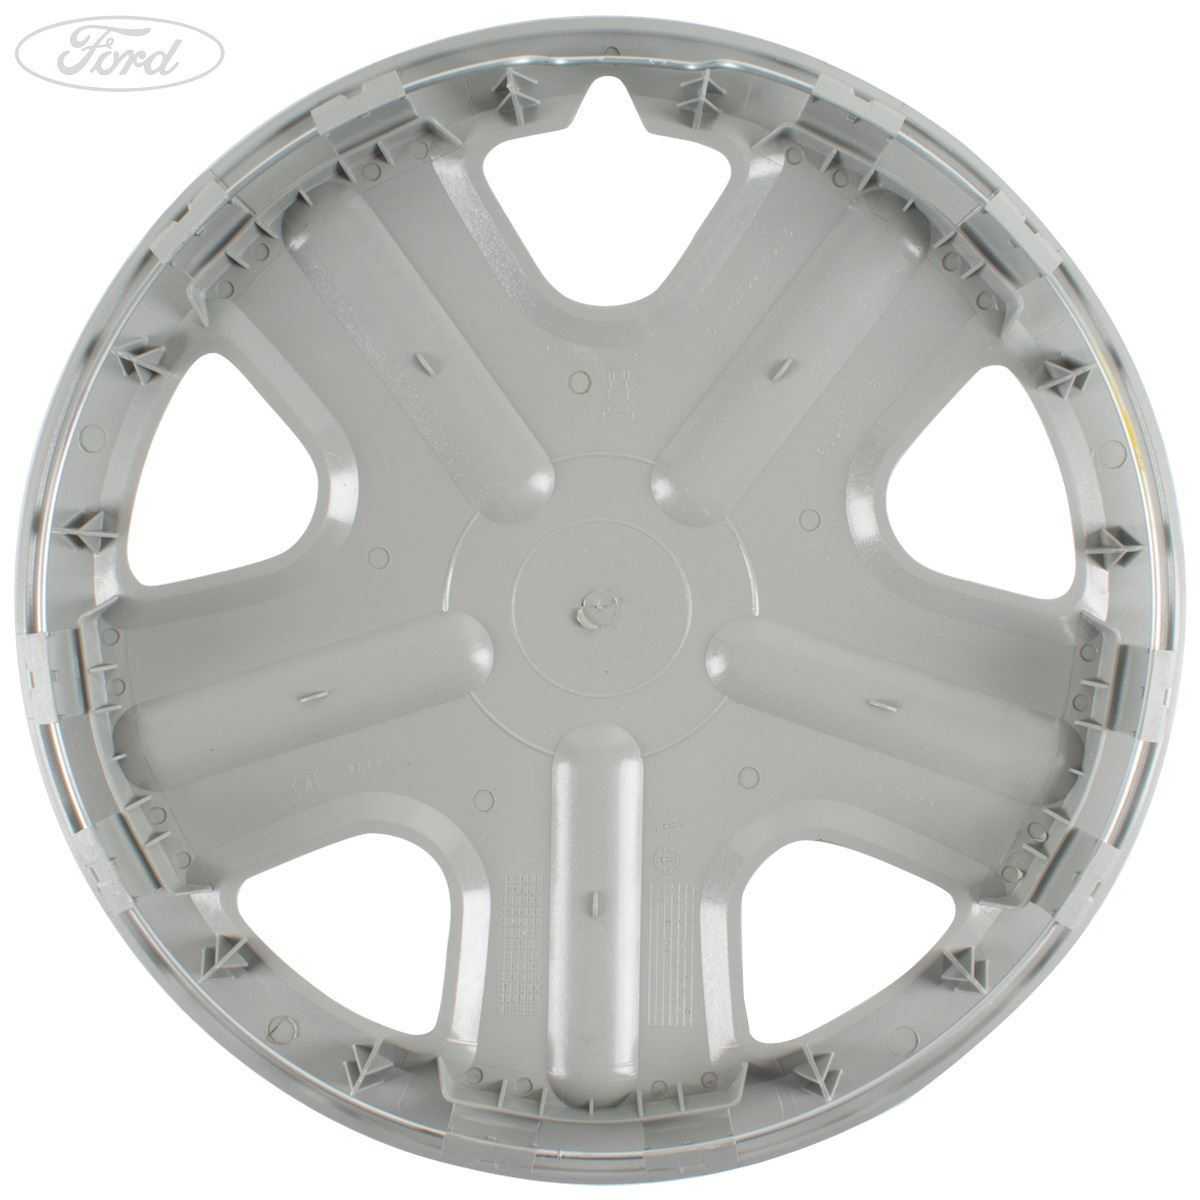 Ford, TRANSIT CONNECT 15" STEEL WHEEL TRIM COVER SILVER X1